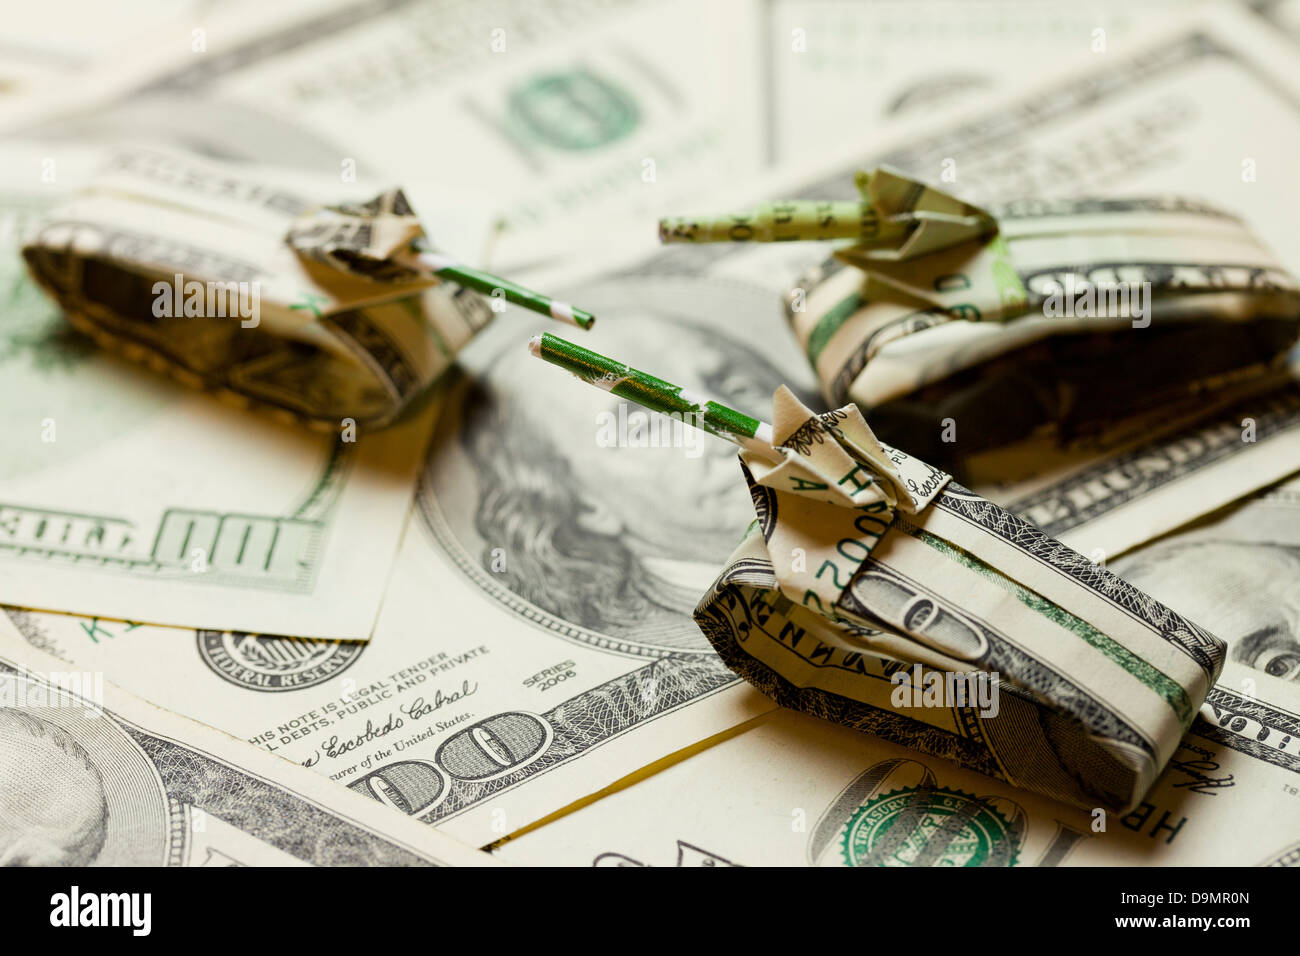 Tanks made with US money Stock Photo